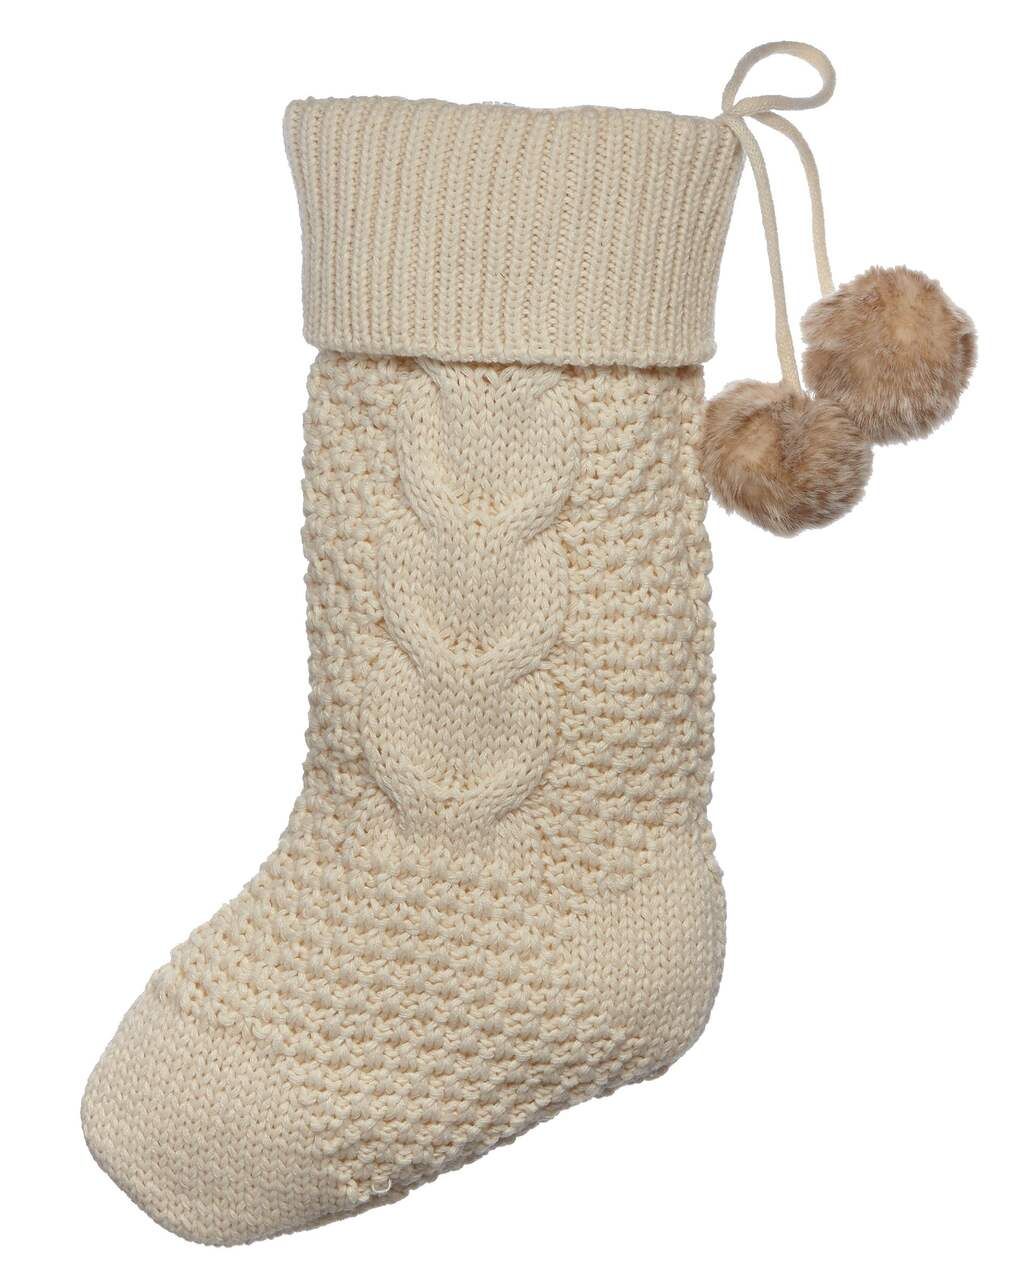 CANVAS Christmas Decoration Oat Cable Knit Stocking, 20 1/2-in | Canadian Tire